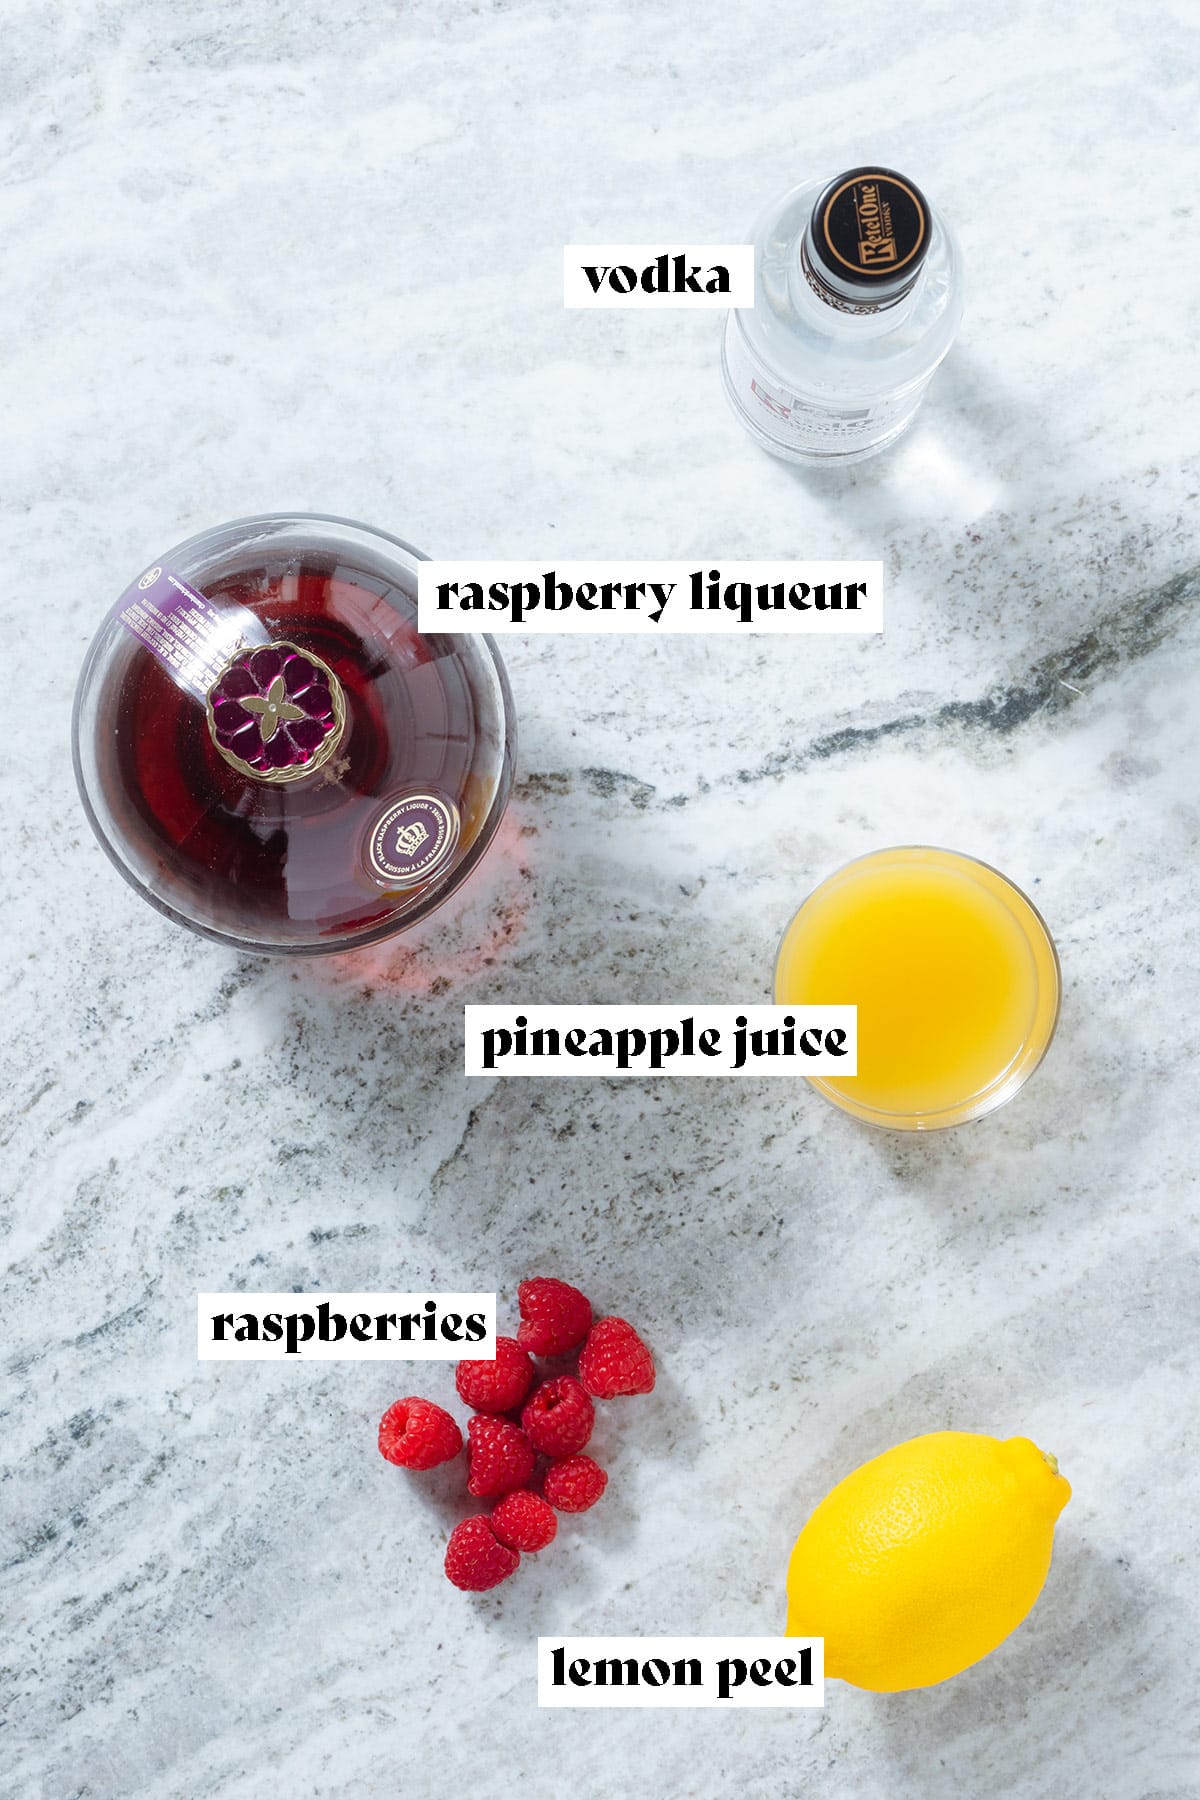 A bottle of vodka, Chambord, a glass of pineapple juice, raspberries, and a lemon on a grey stone background with text overlay.